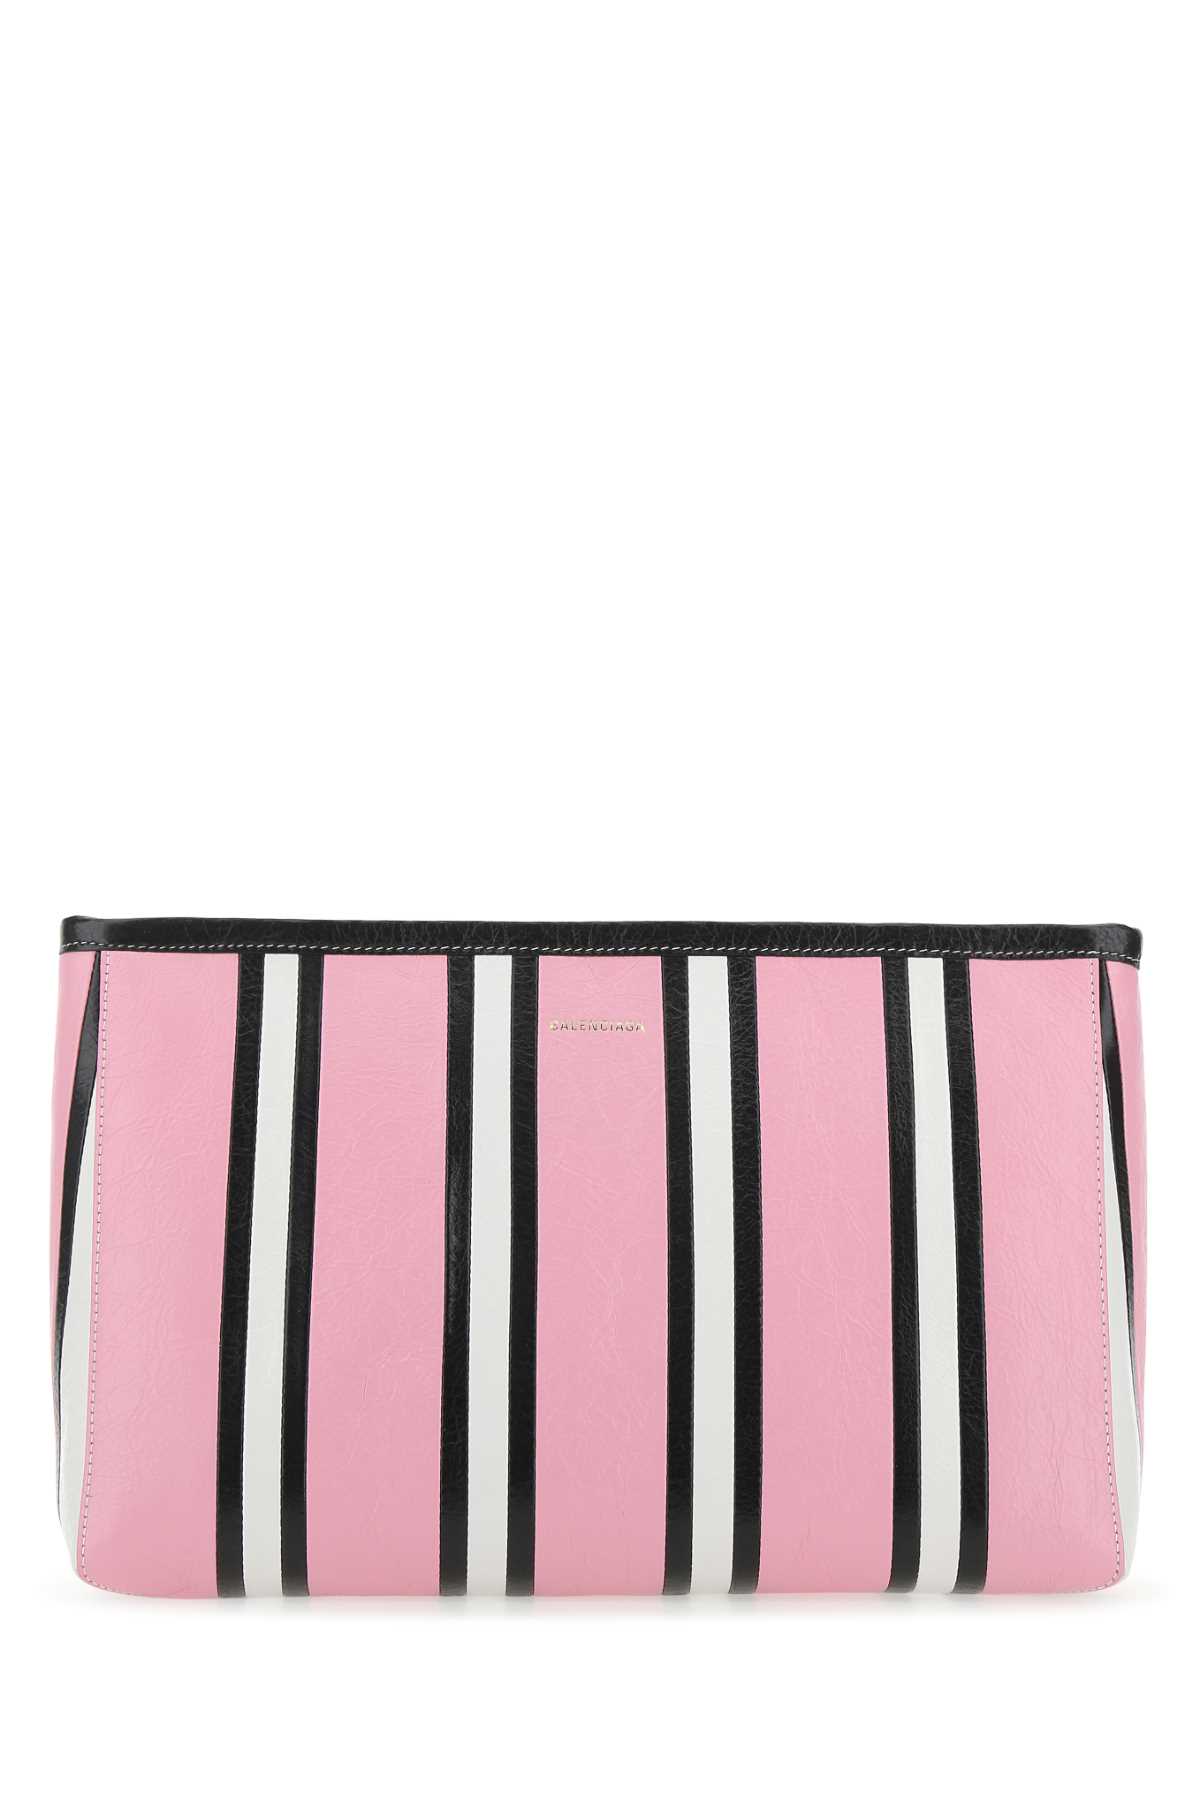 Multicolor Leather Barbes Clutch